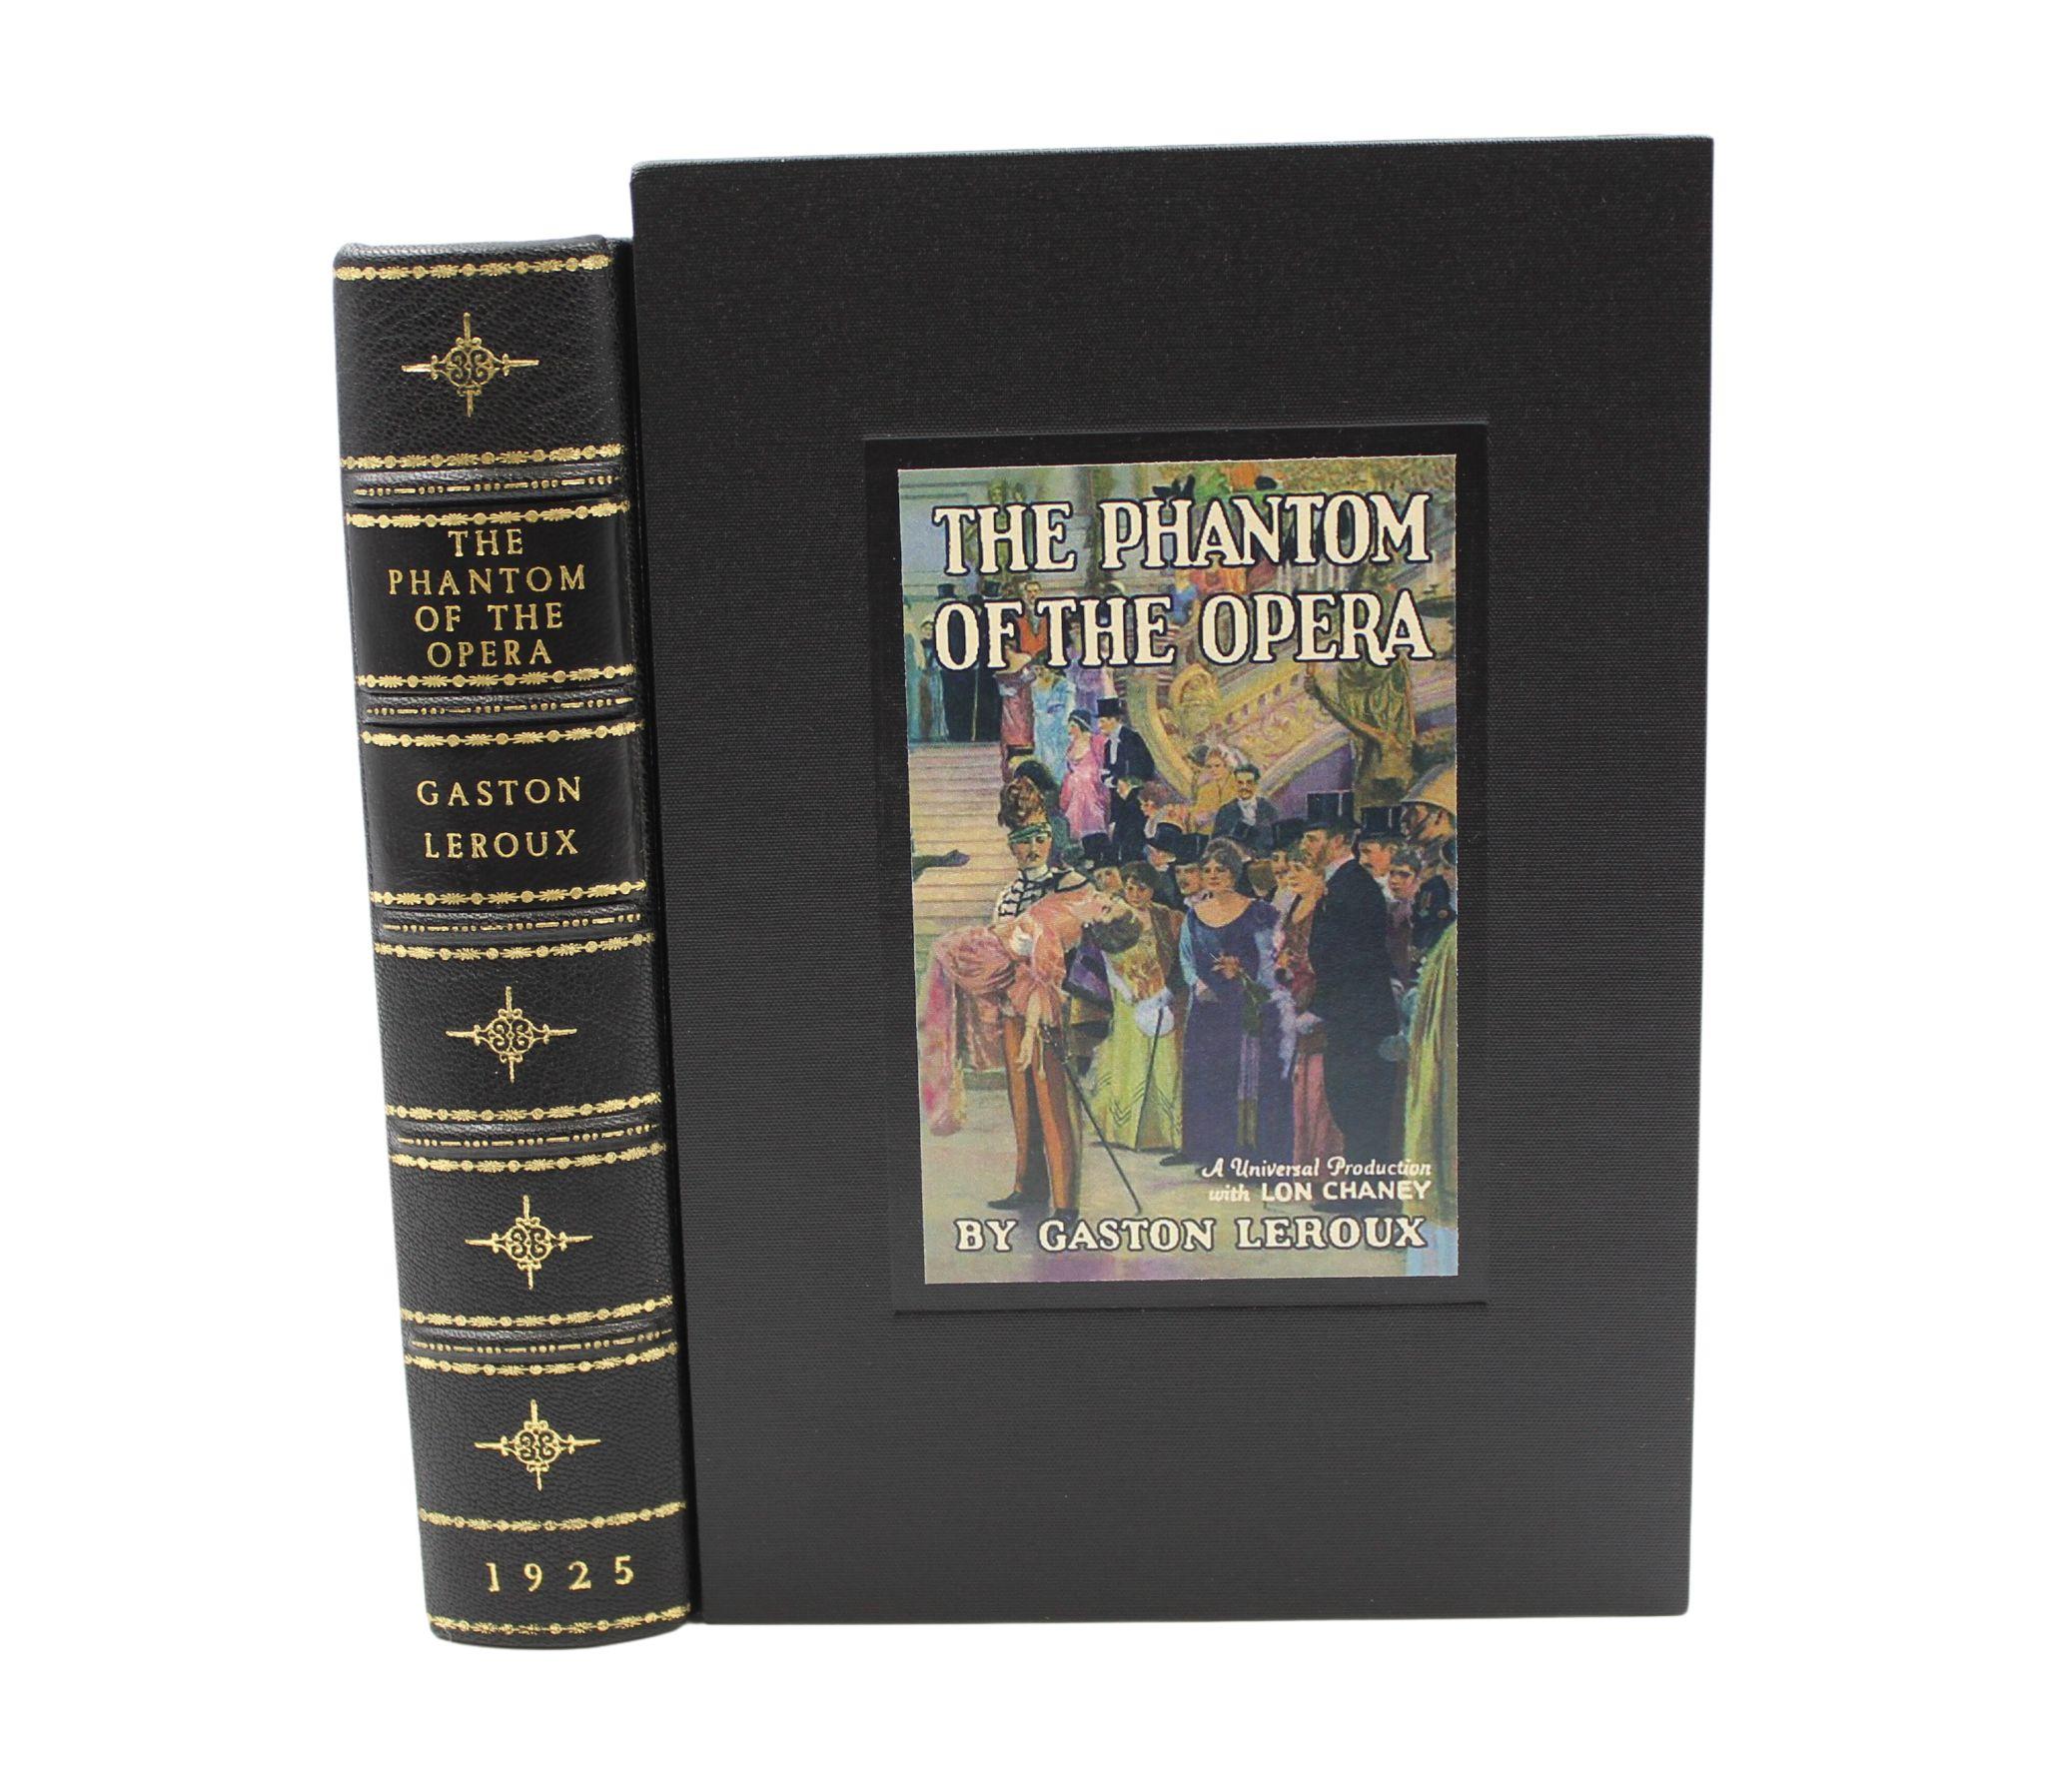 American The Phantom of the Opera by Gaston Leroux, Signed by Carla Laemmle, Photoplay For Sale